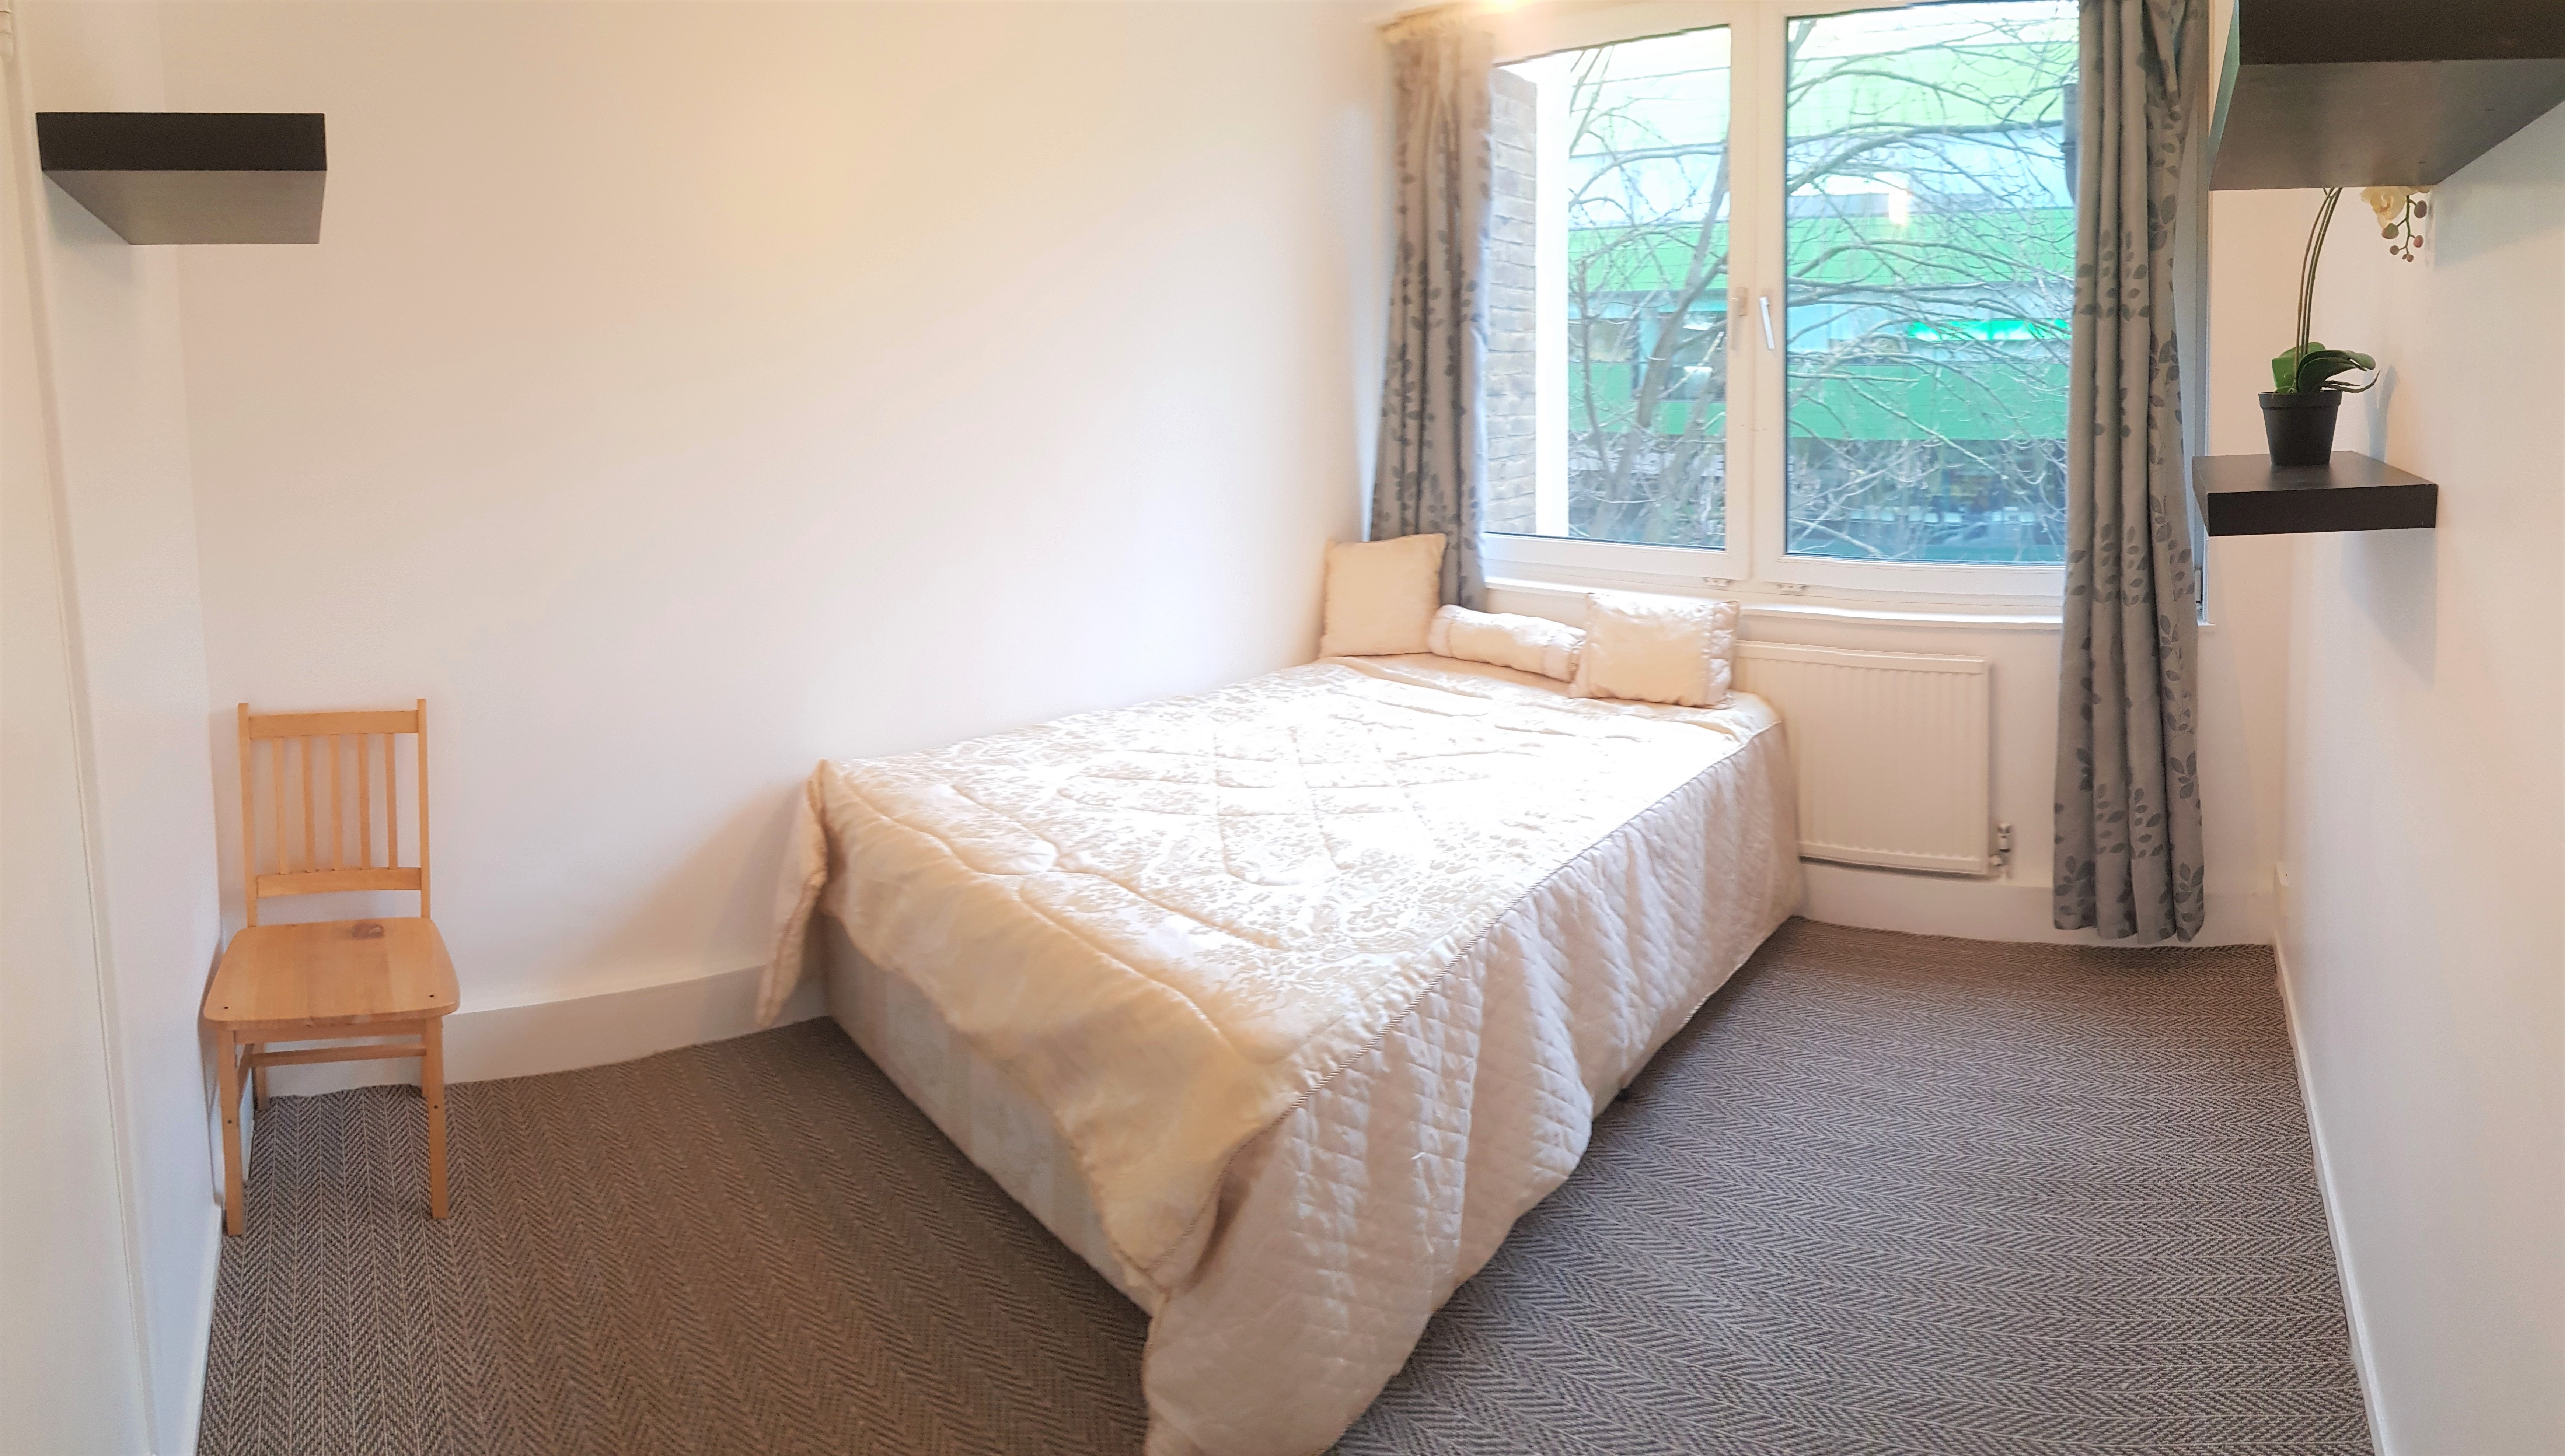 1 bed Flat for rent in London. From ubaTaeCJ